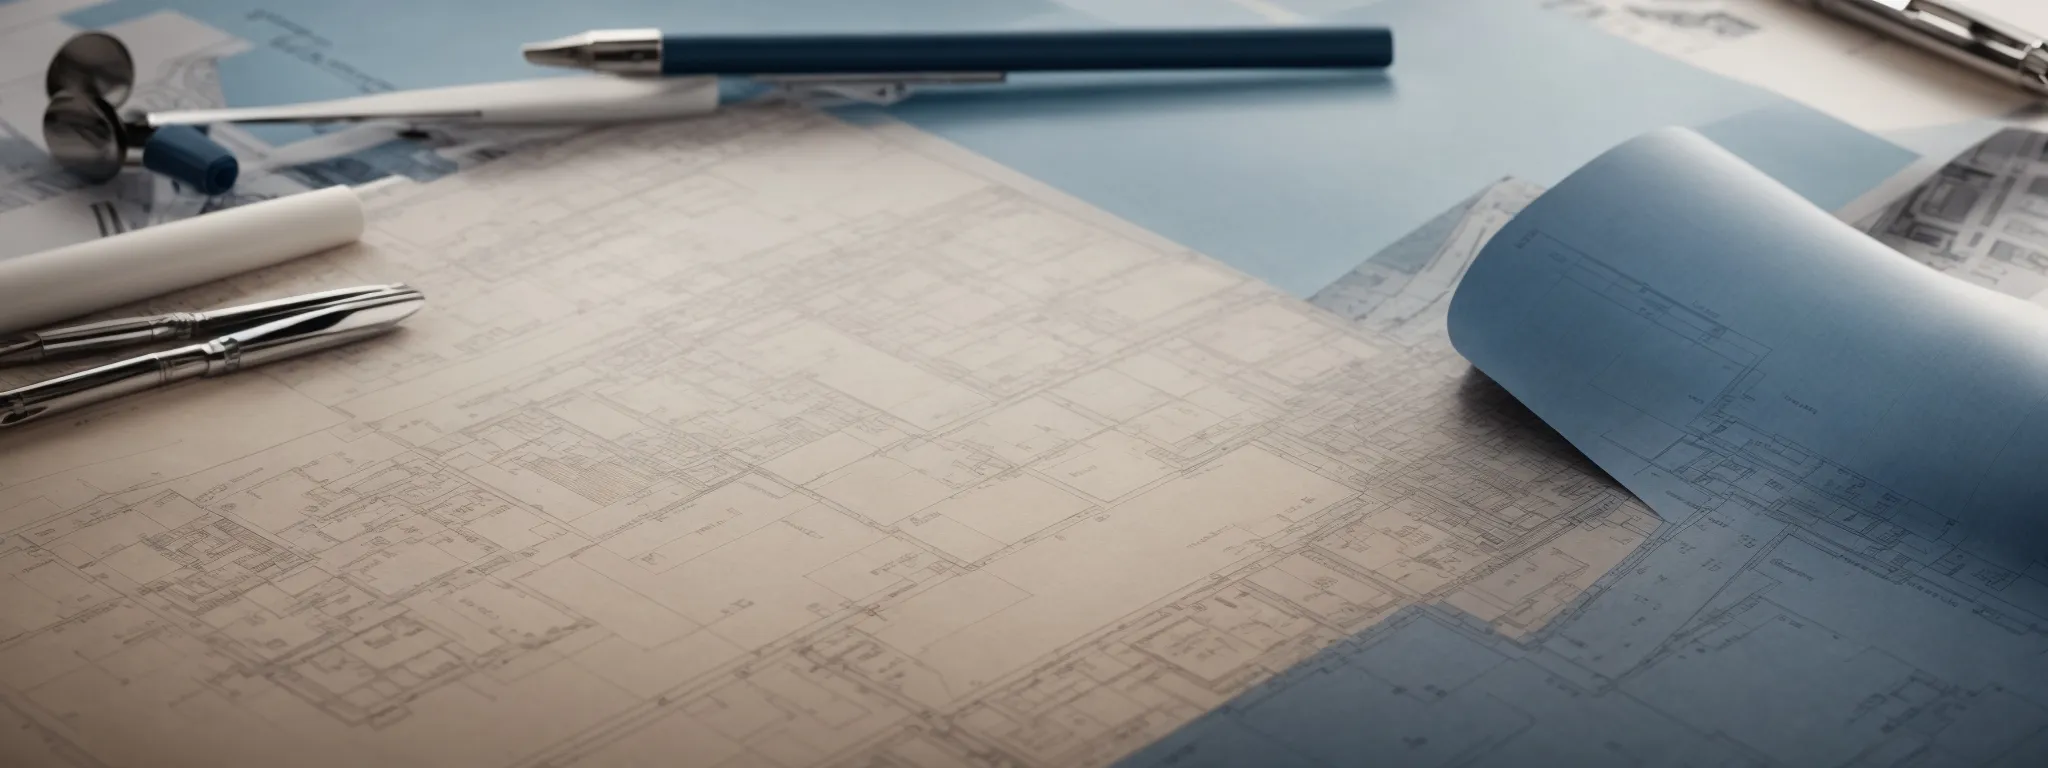 a blueprint on a table with various architectural tools, symbolizing strategic planning and construction.